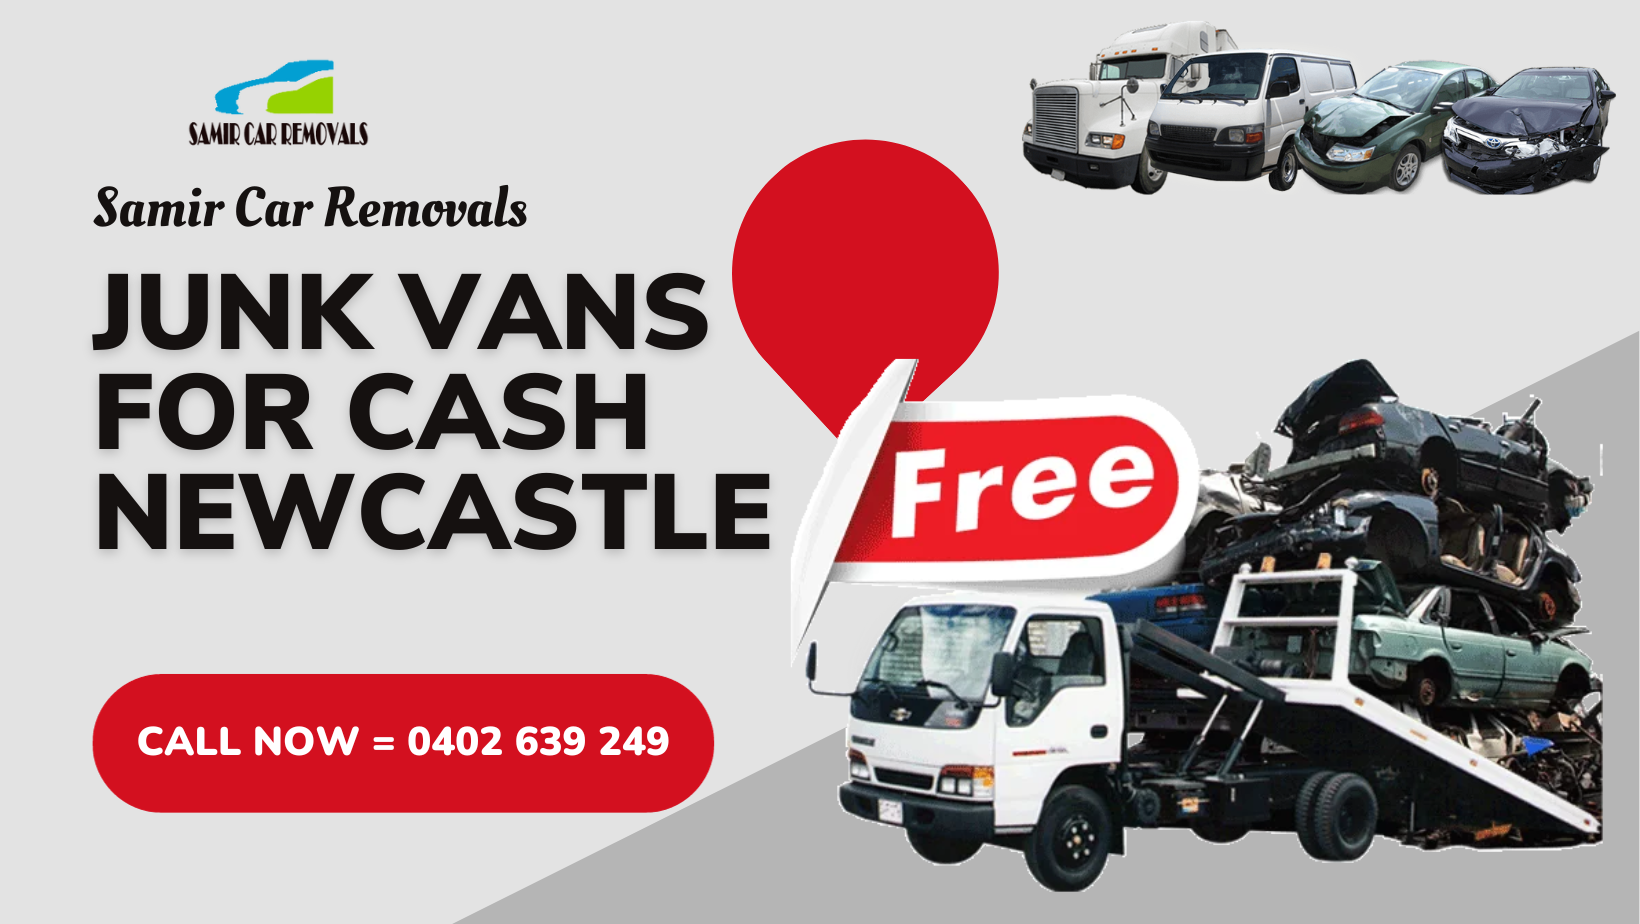 Turn Your Junk Vans Into Cash in Newcastle with Samir Car Removals